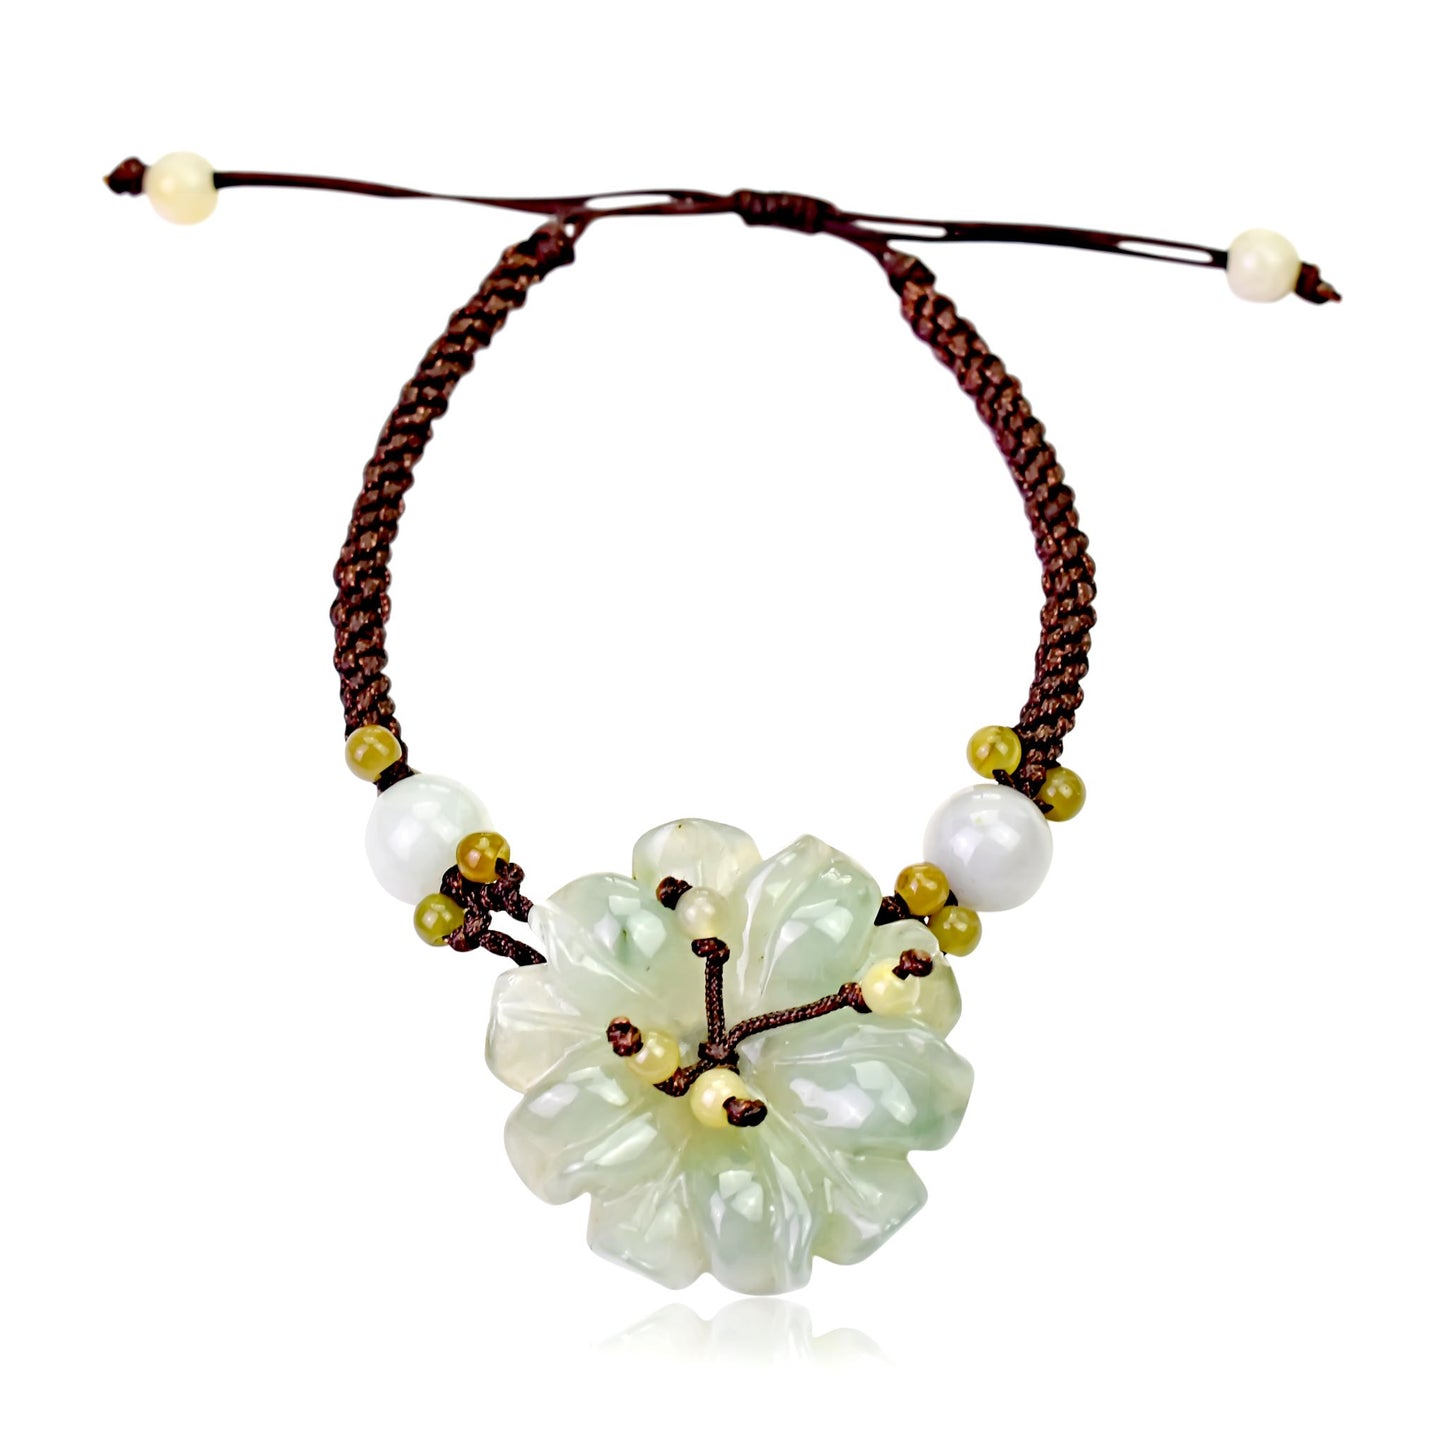 Add Sparkle to Your Outfits with the Anemone Flower Bracelet made with Brown Cord